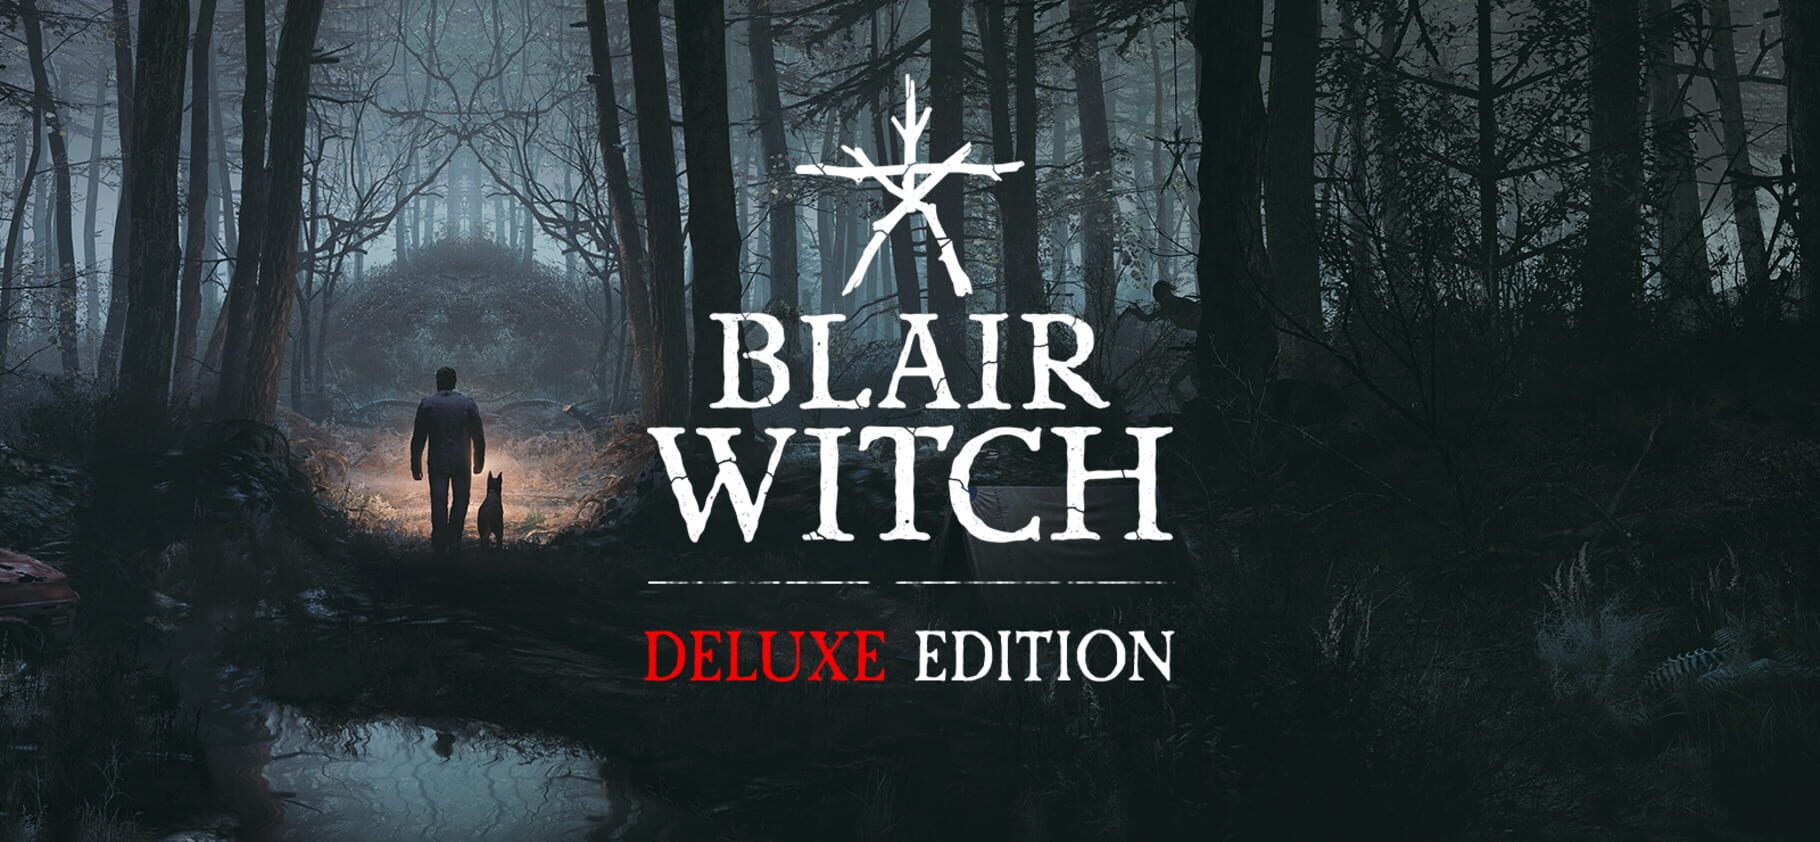 Blair Witch: Deluxe Edition artwork